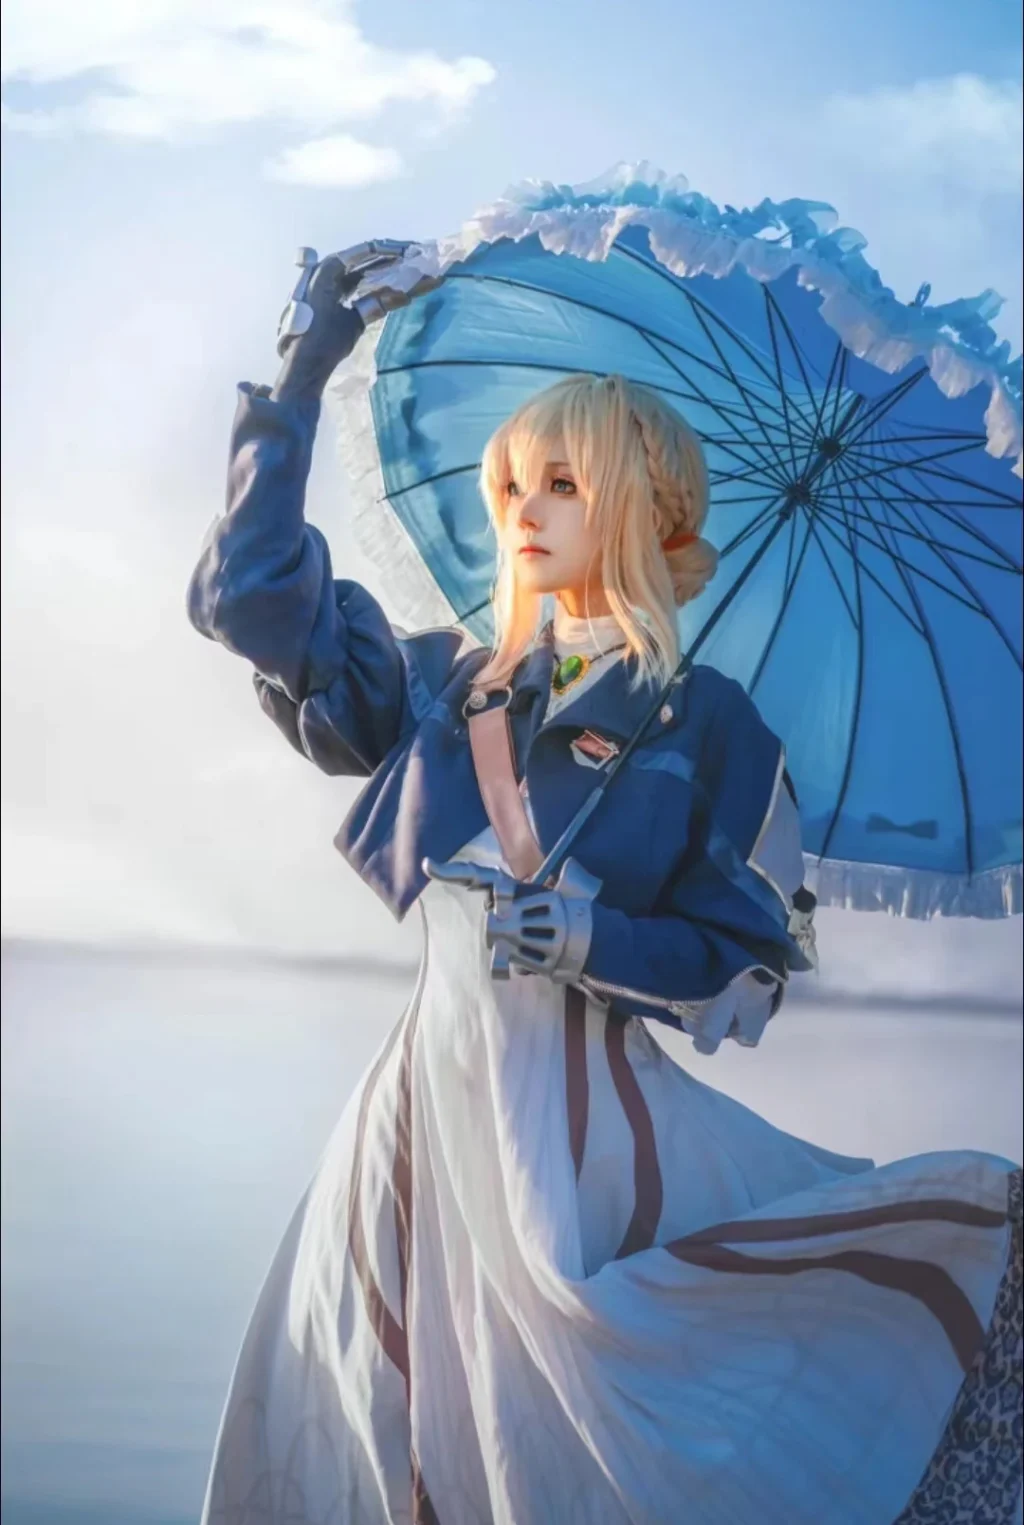 Violet Evergarden Cosplay Costume Anime Auto Memories Doll There Is No Time for Flowers To Wither 4 - Violet Evergarden Store